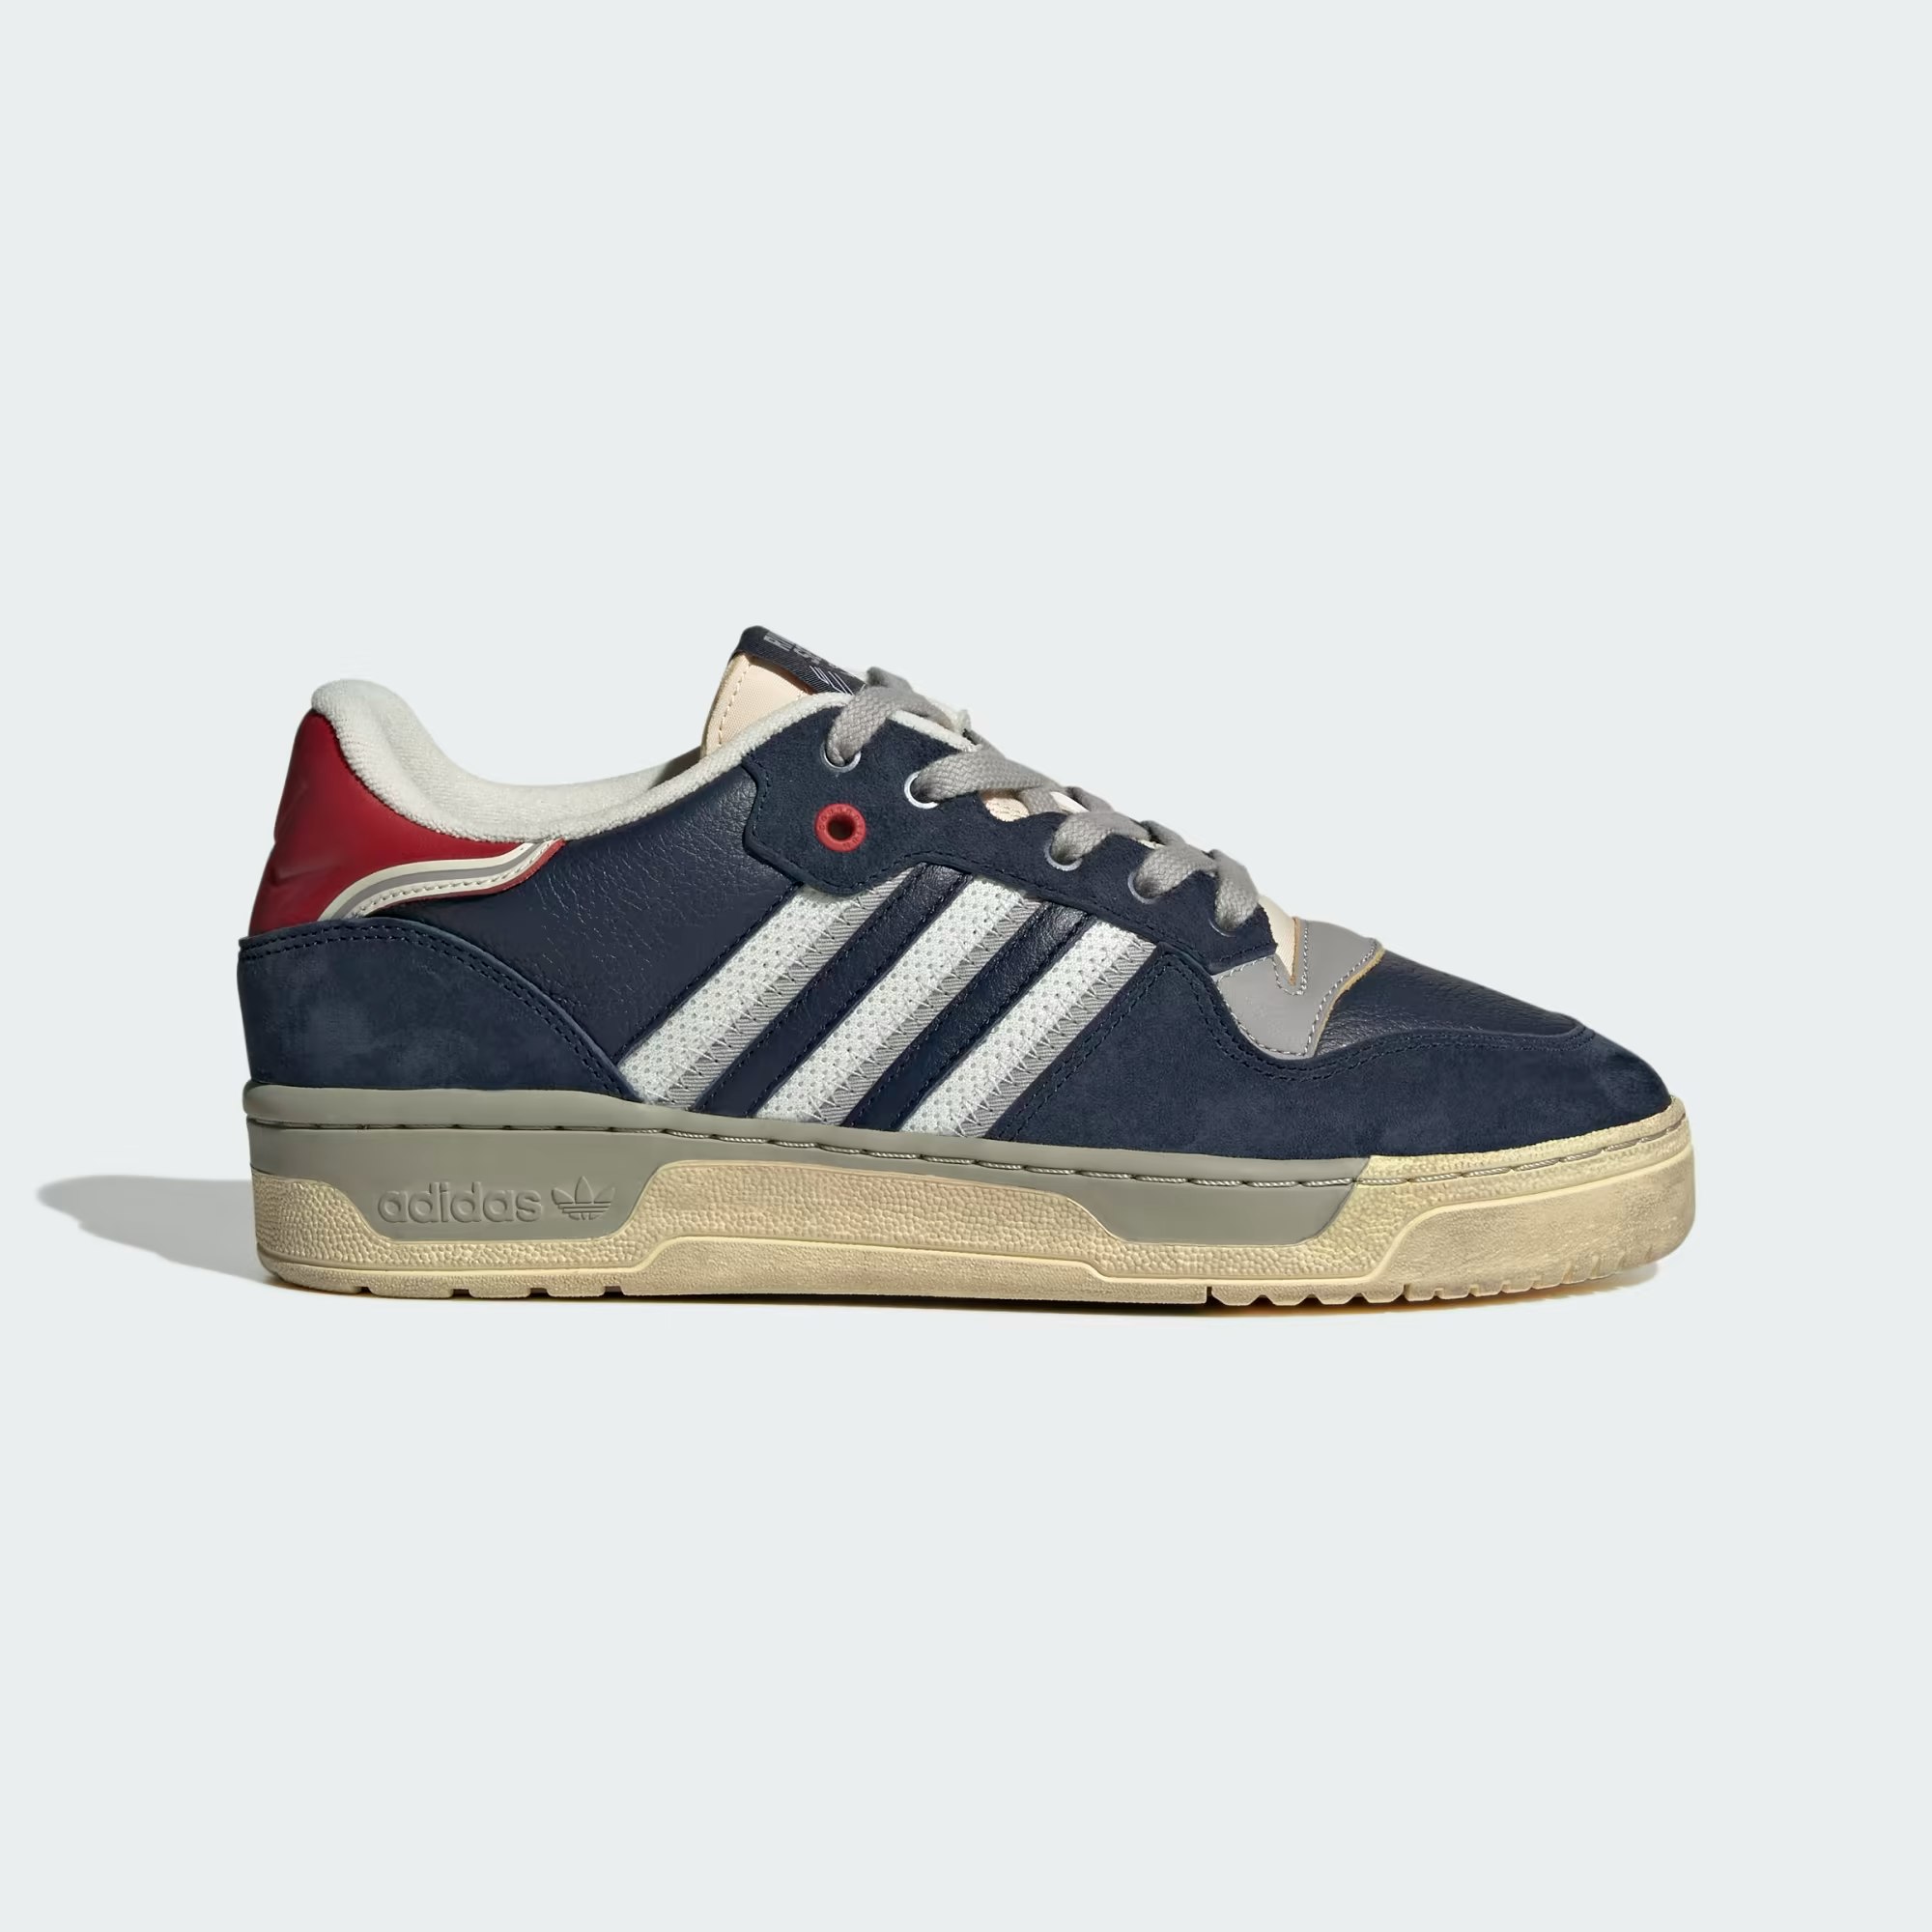 Extra Butter x adidas Rivalry Low "Collegiate Navy"